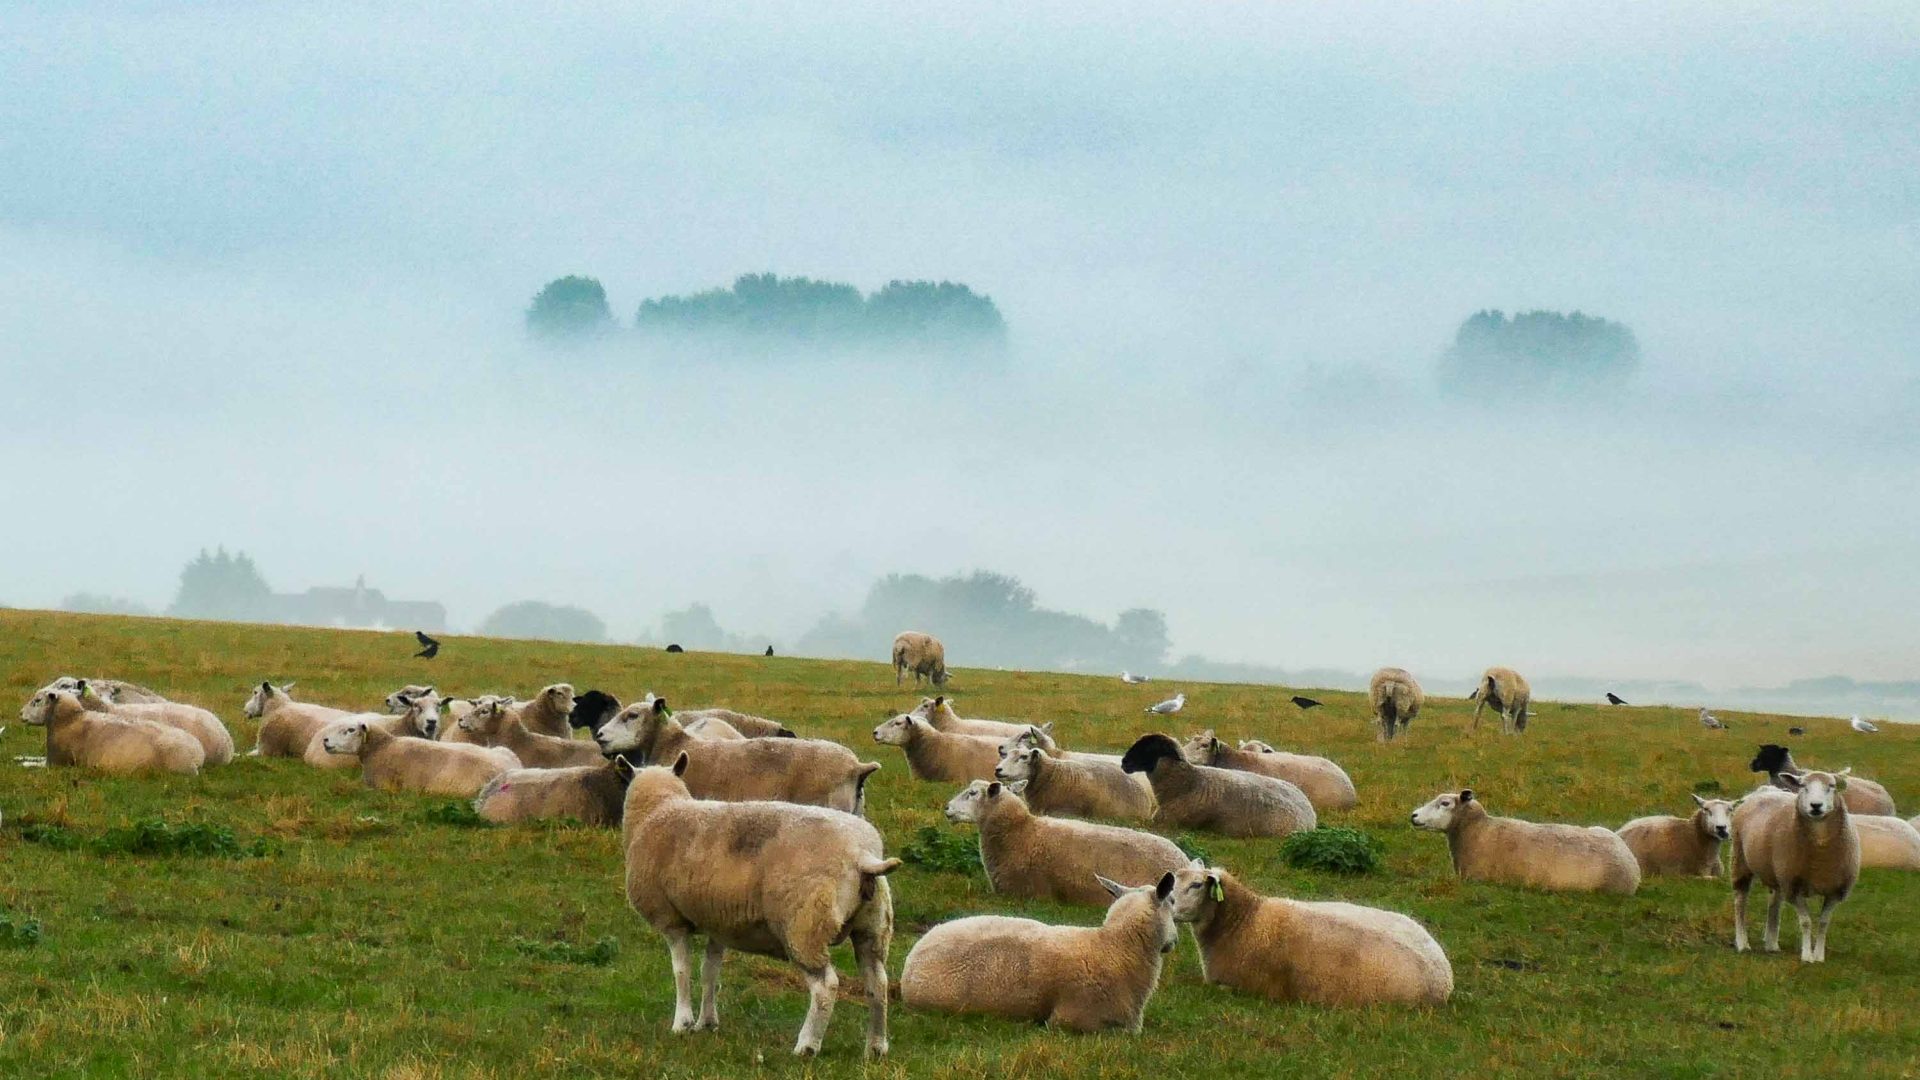 Sheep stand on a hill that is shrouded in cloud.